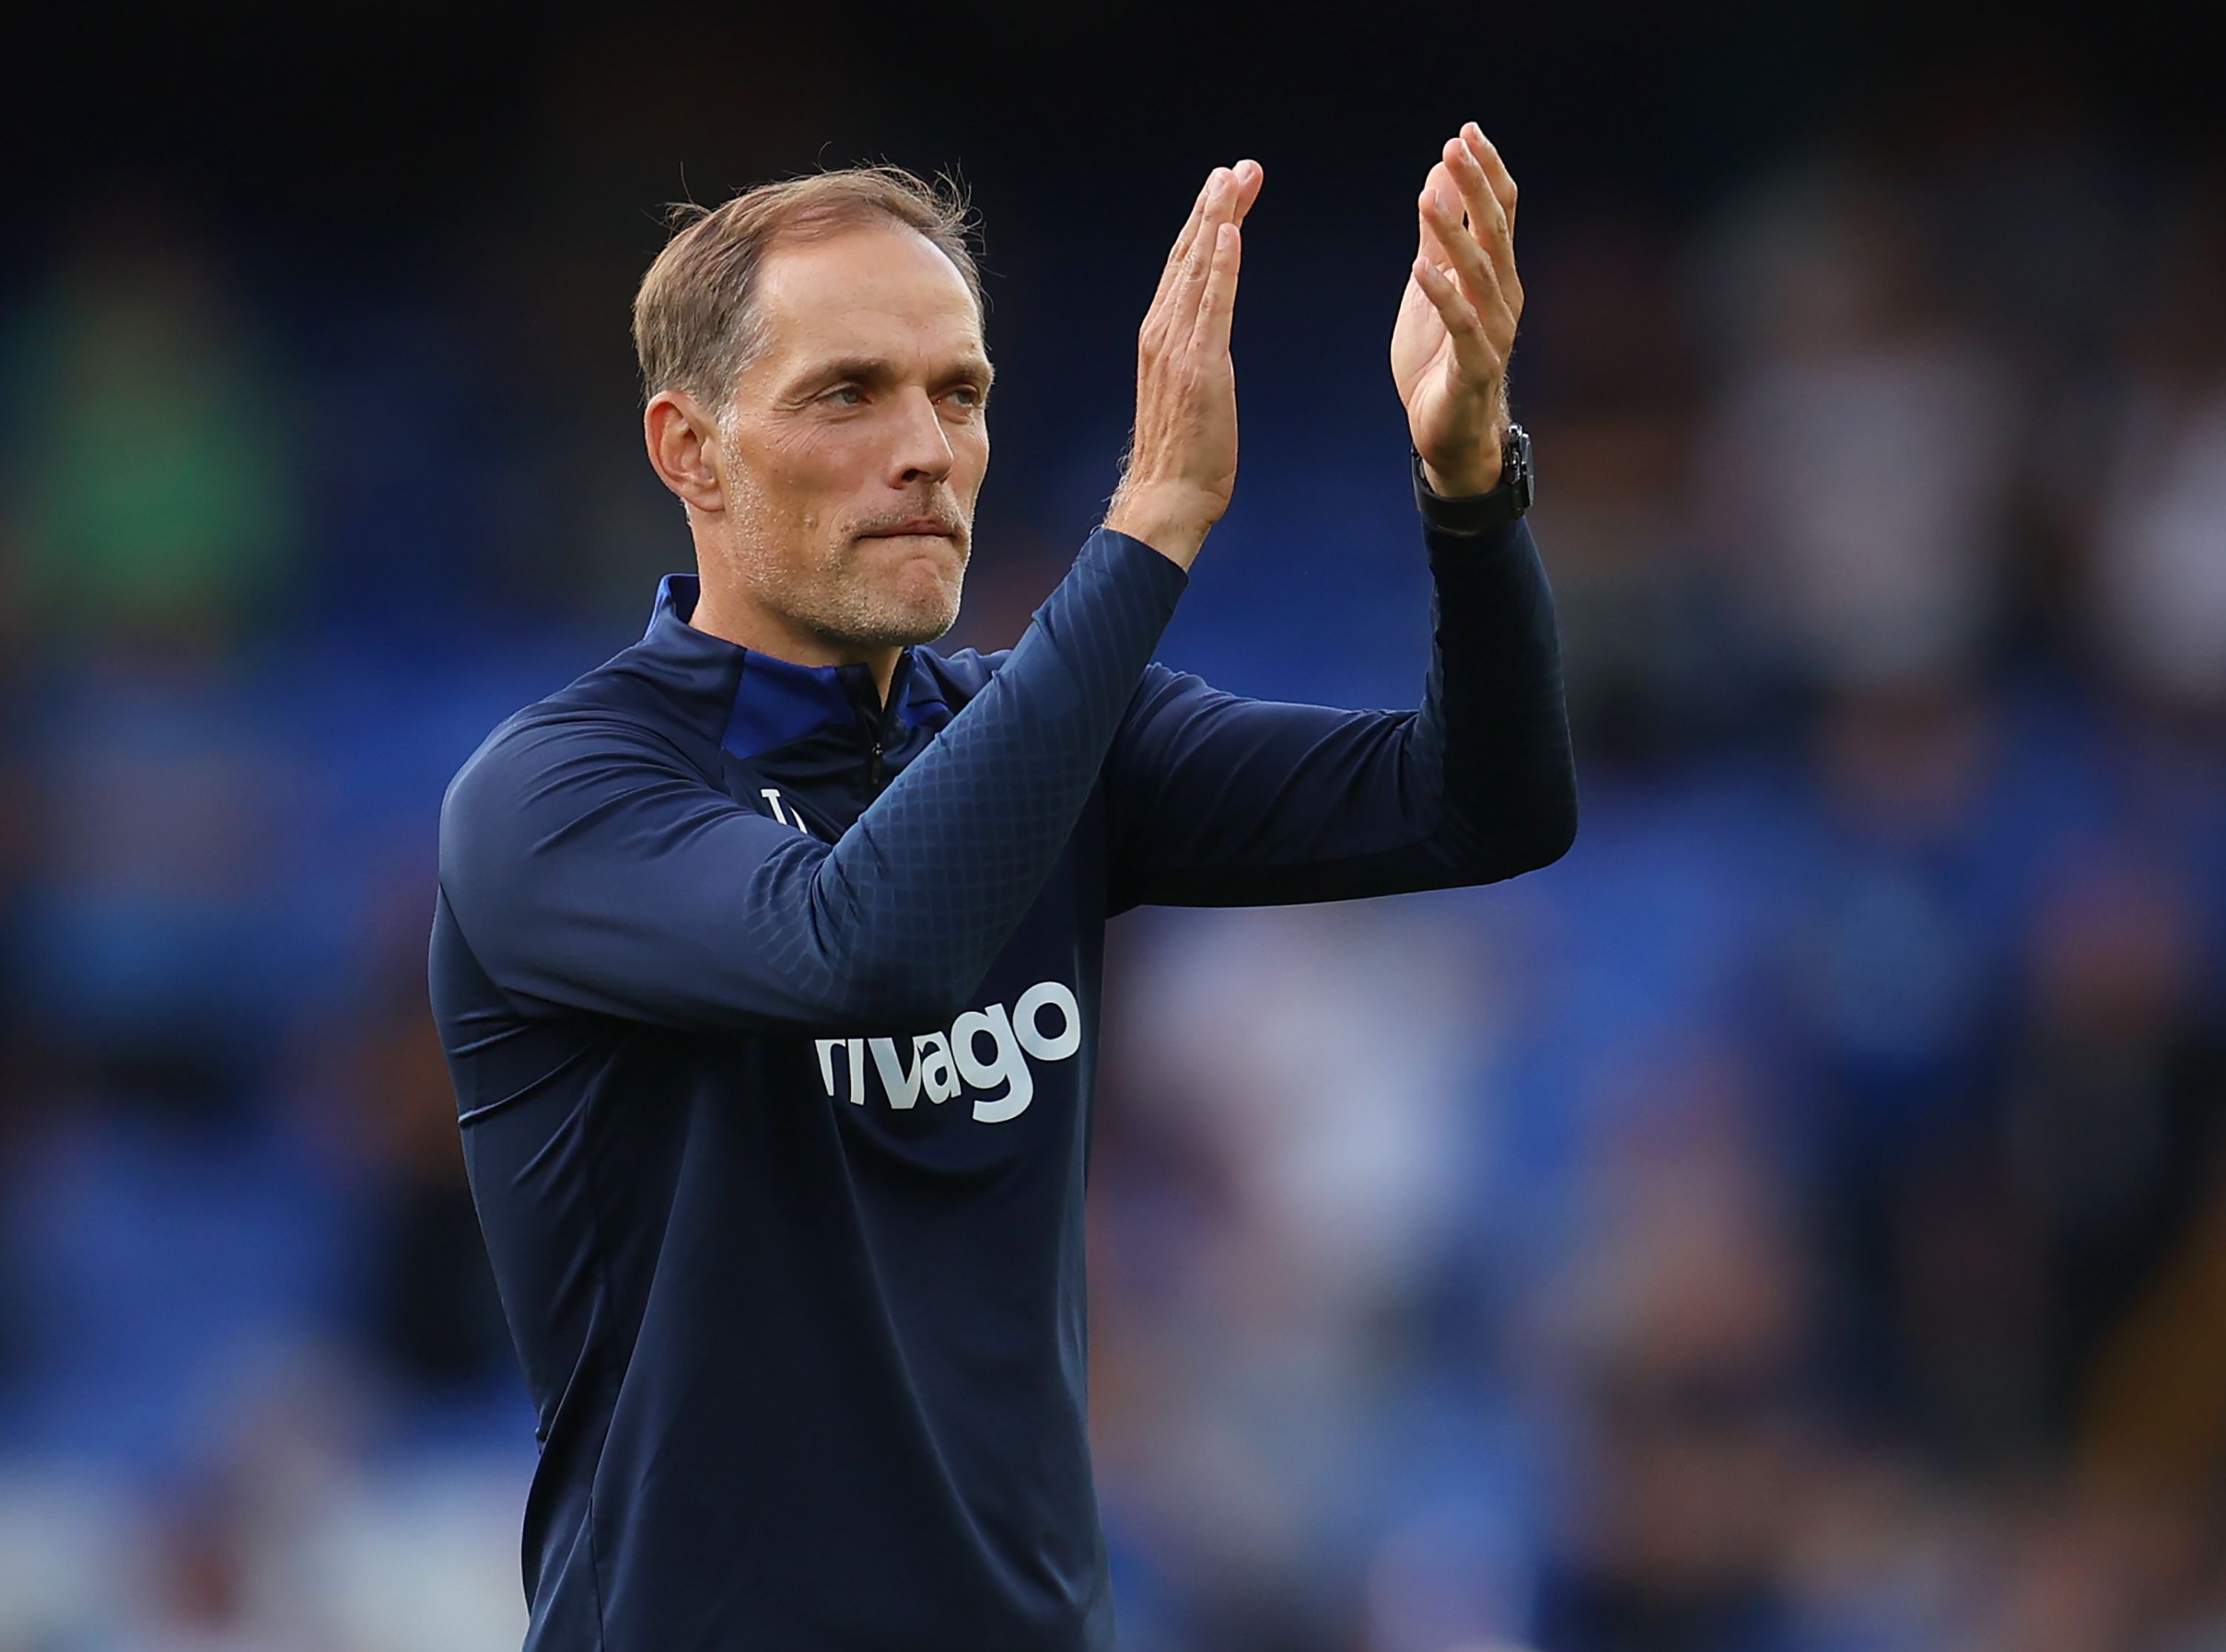  Thomas Tuchel, Manager of Chelsea, applauds their fans